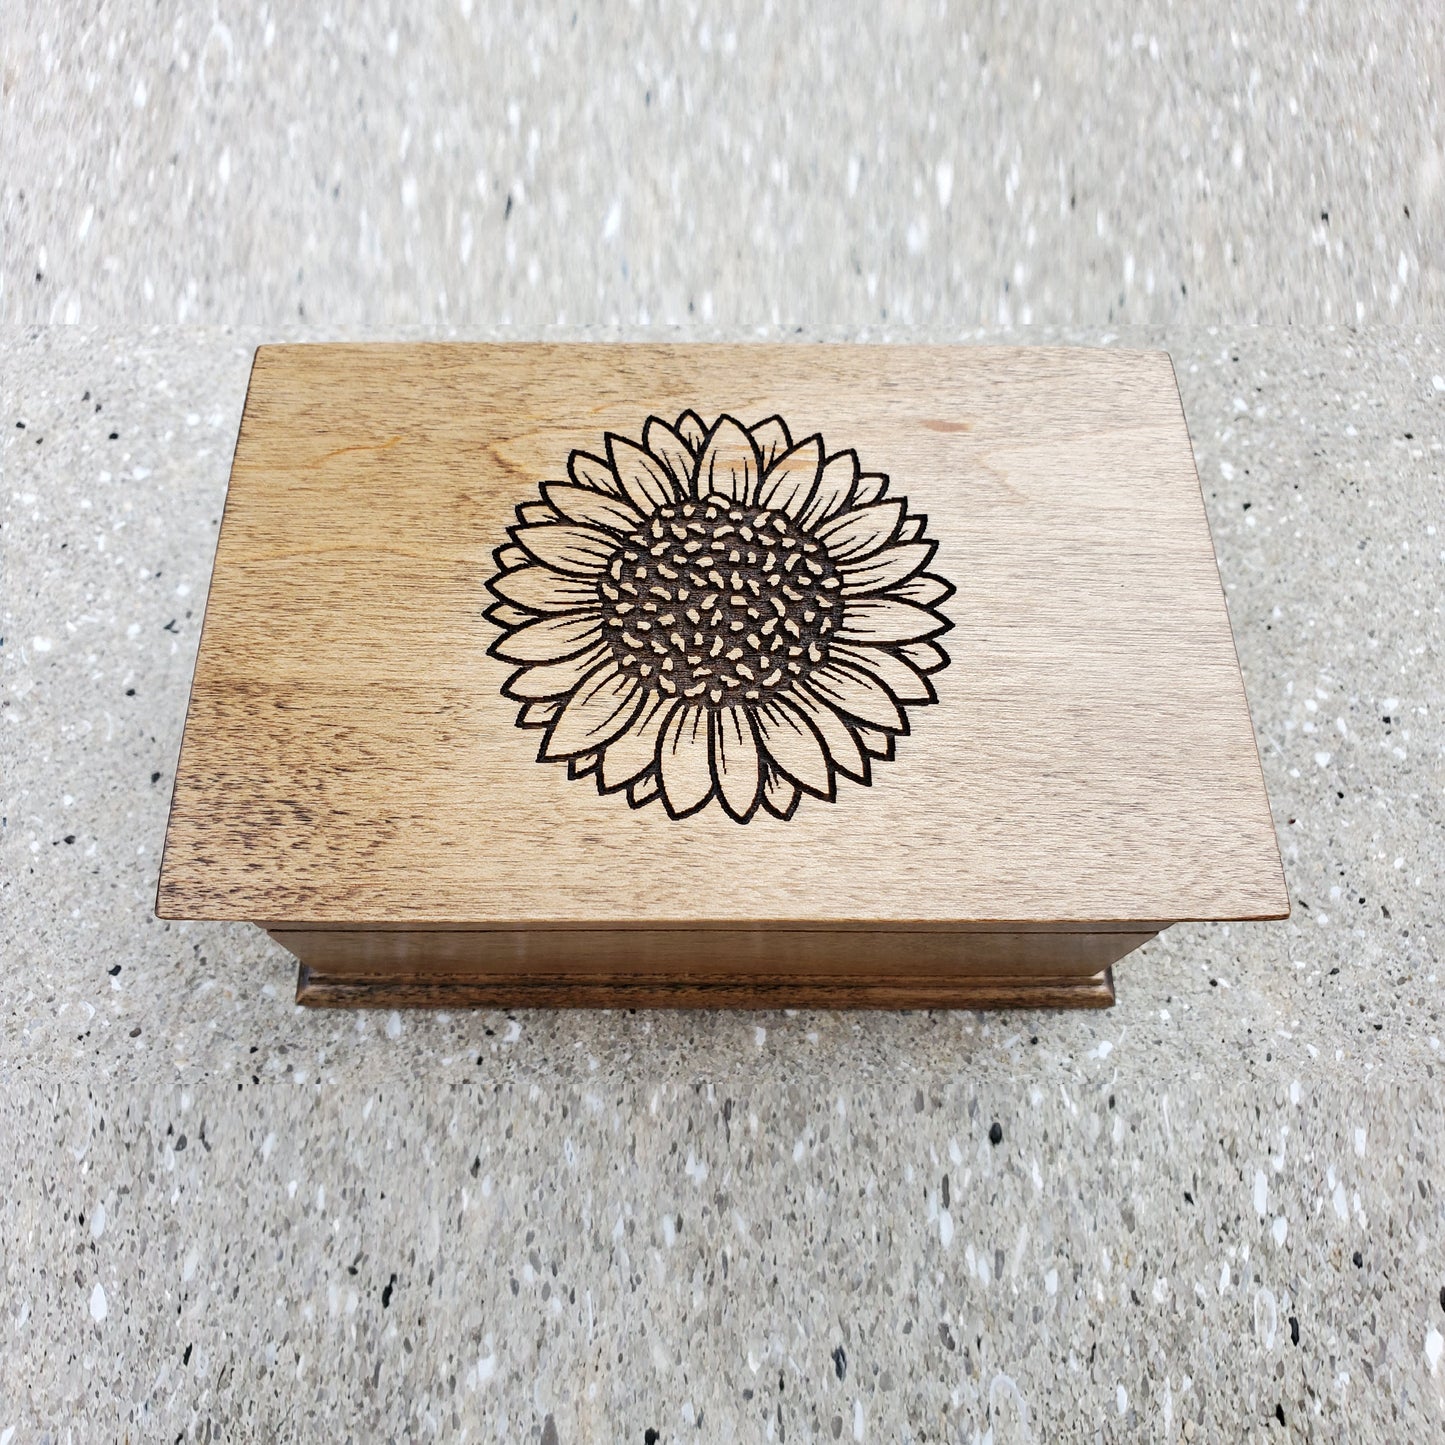 Sunflower Jewelry Box with music player inside